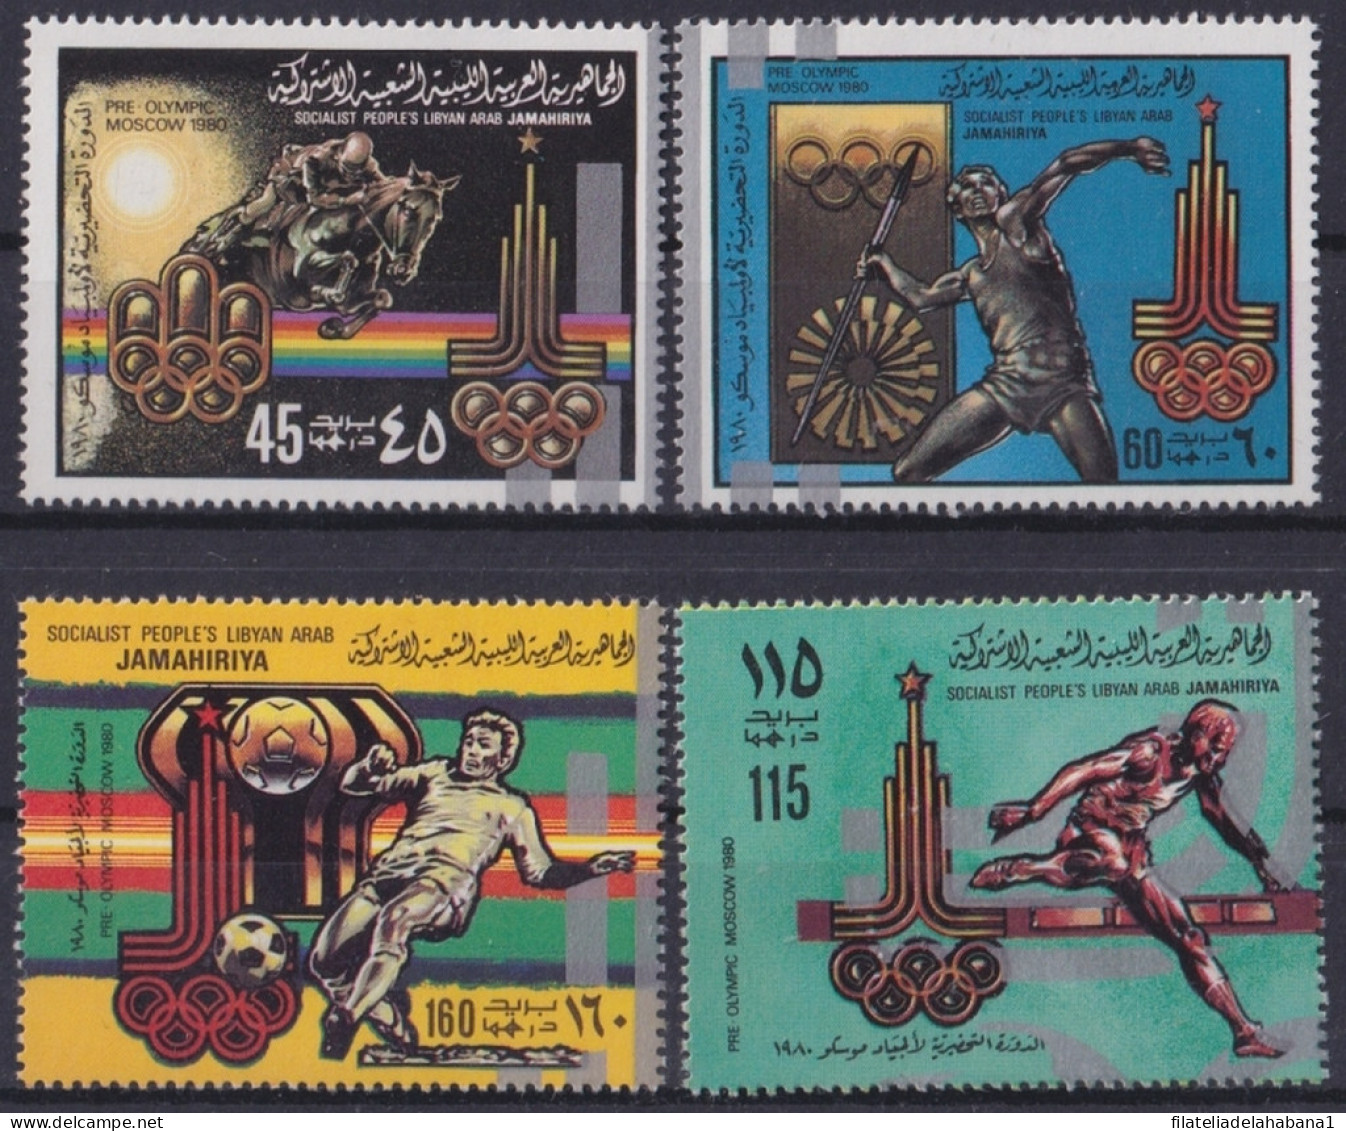 F-EX50093 LIBYA MNH 1980 MOSCOW OLYMPIC GAMES ATHLETISM JAVELIN SOCCER FOOTBALL - Sommer 1980: Moskau